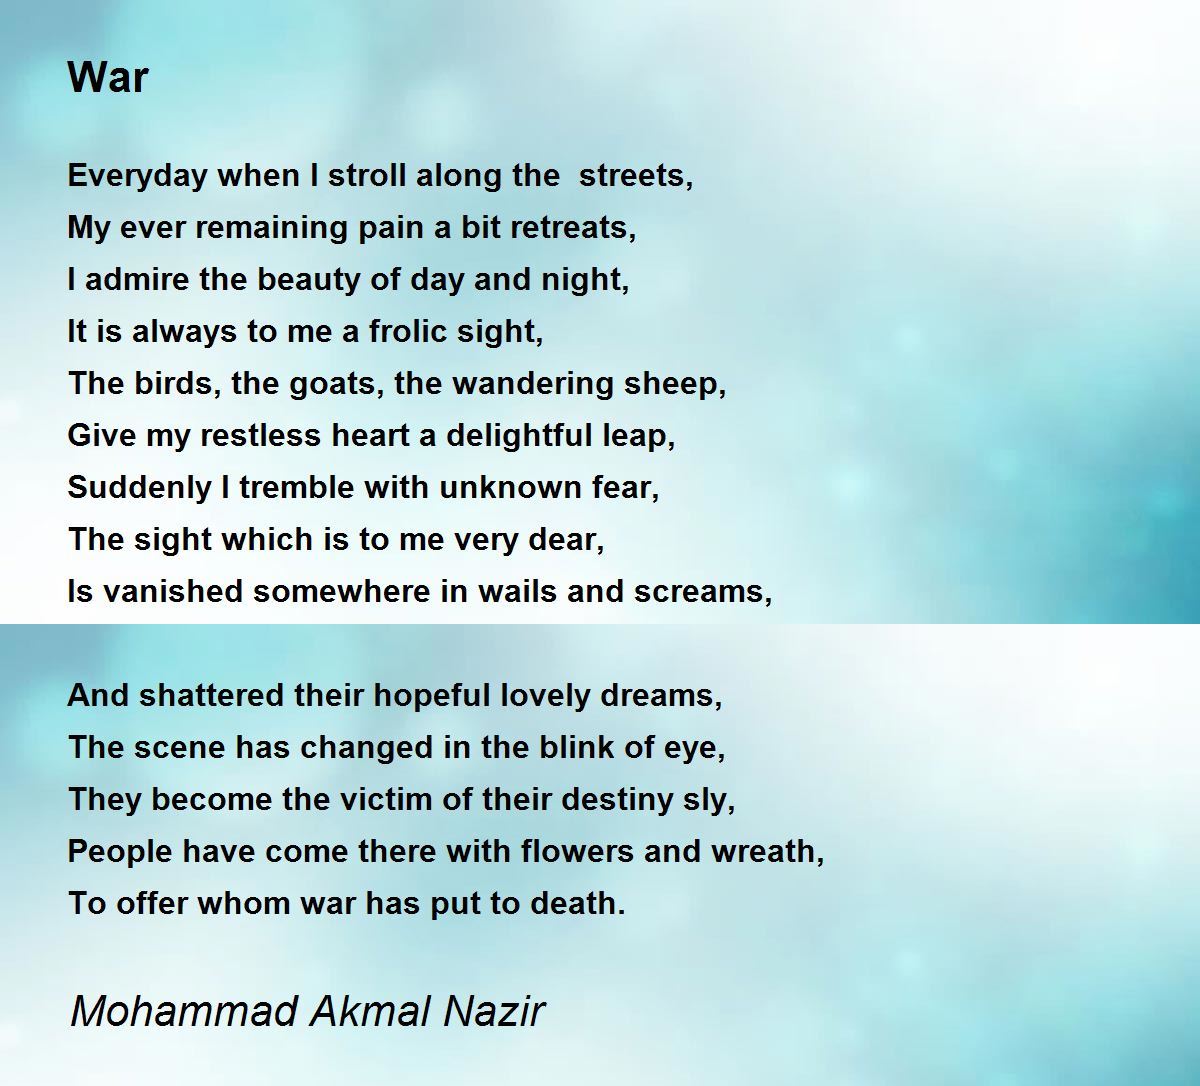 A Man Of Simplicity - A Man Of Simplicity Poem by Mohammad Akmal Nazir